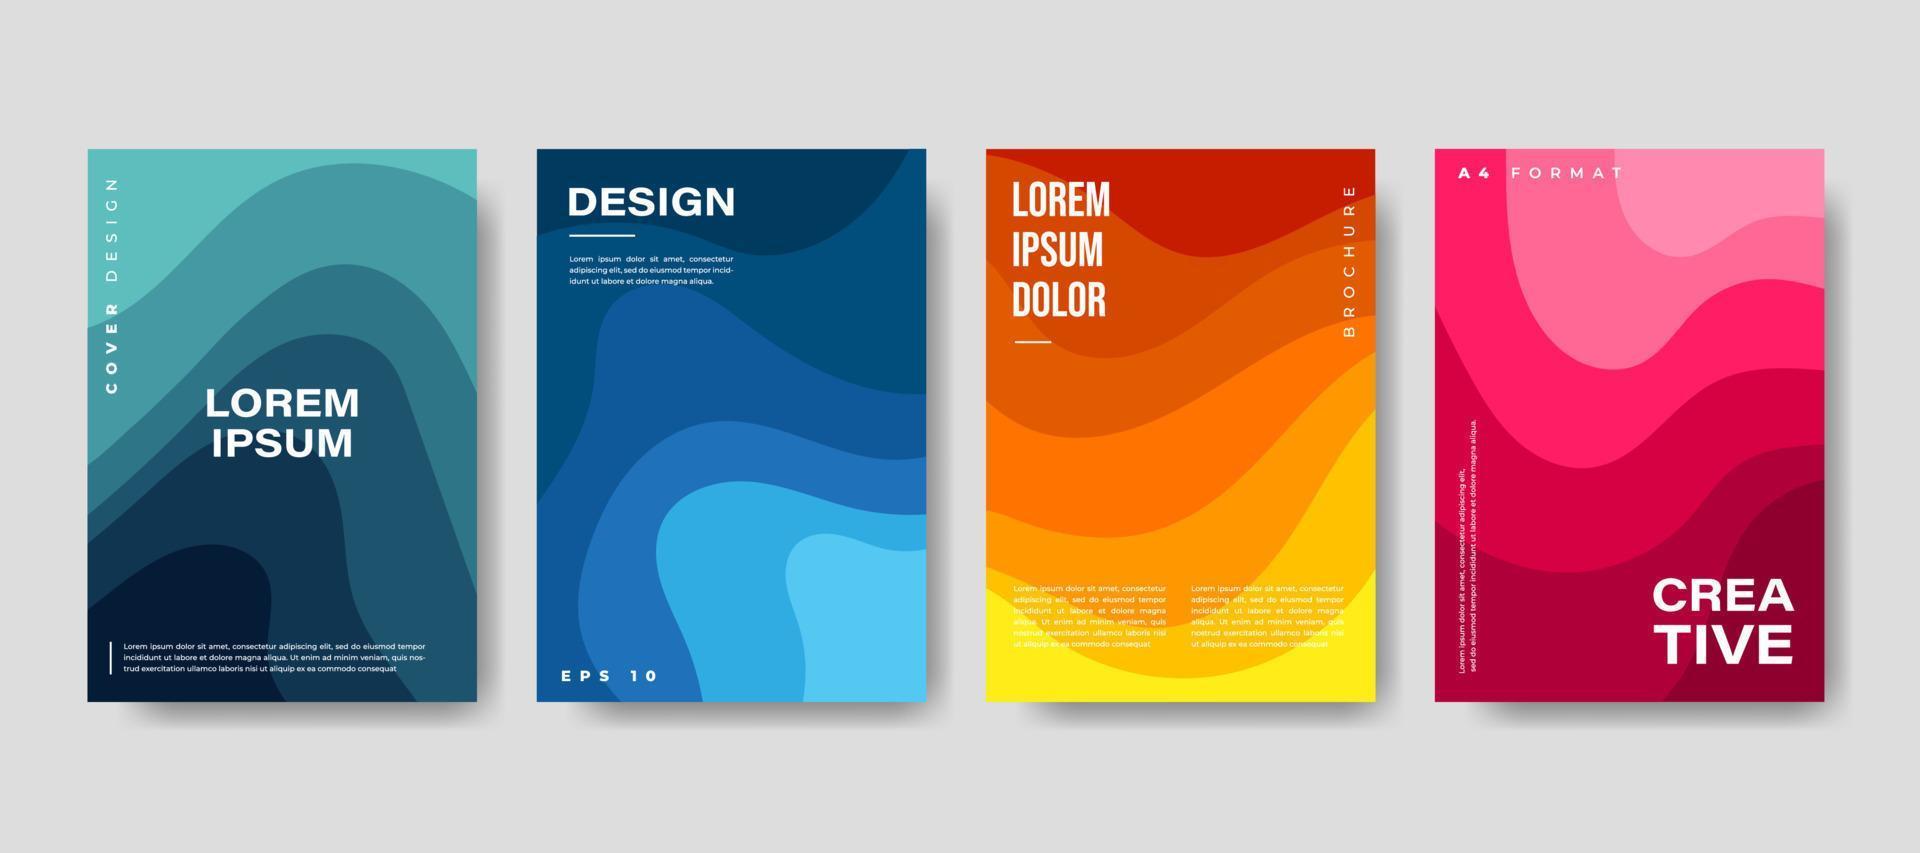 Set of colorful book cover brochure designs. Vector illustration.